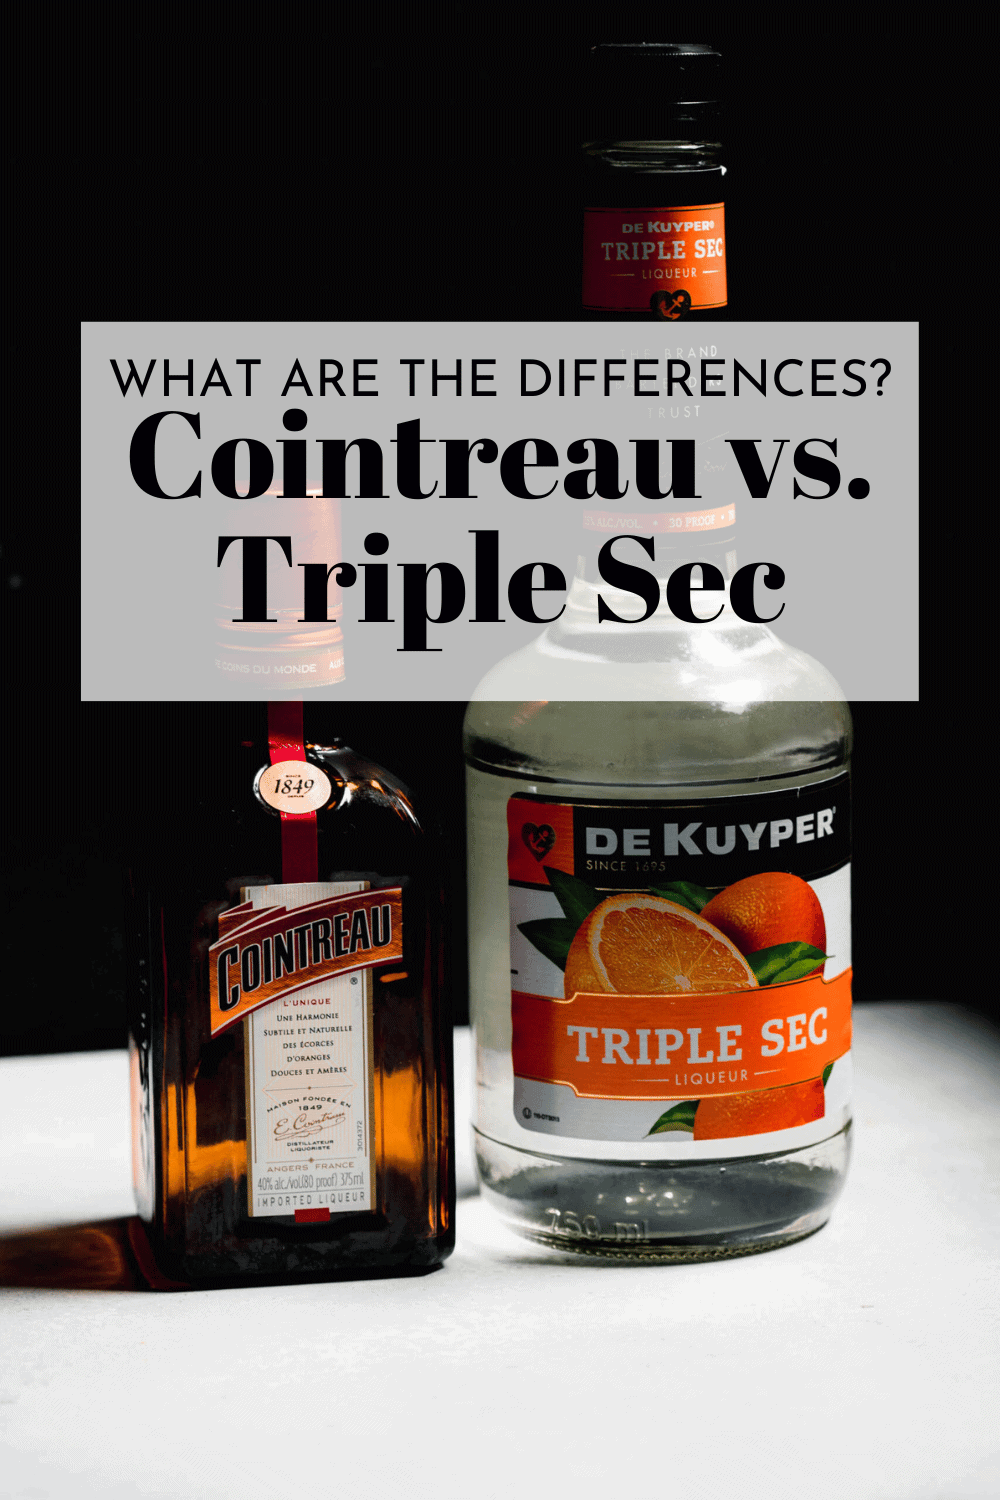 Bottle of cointreau next to bottle of triple sec with text overlay.